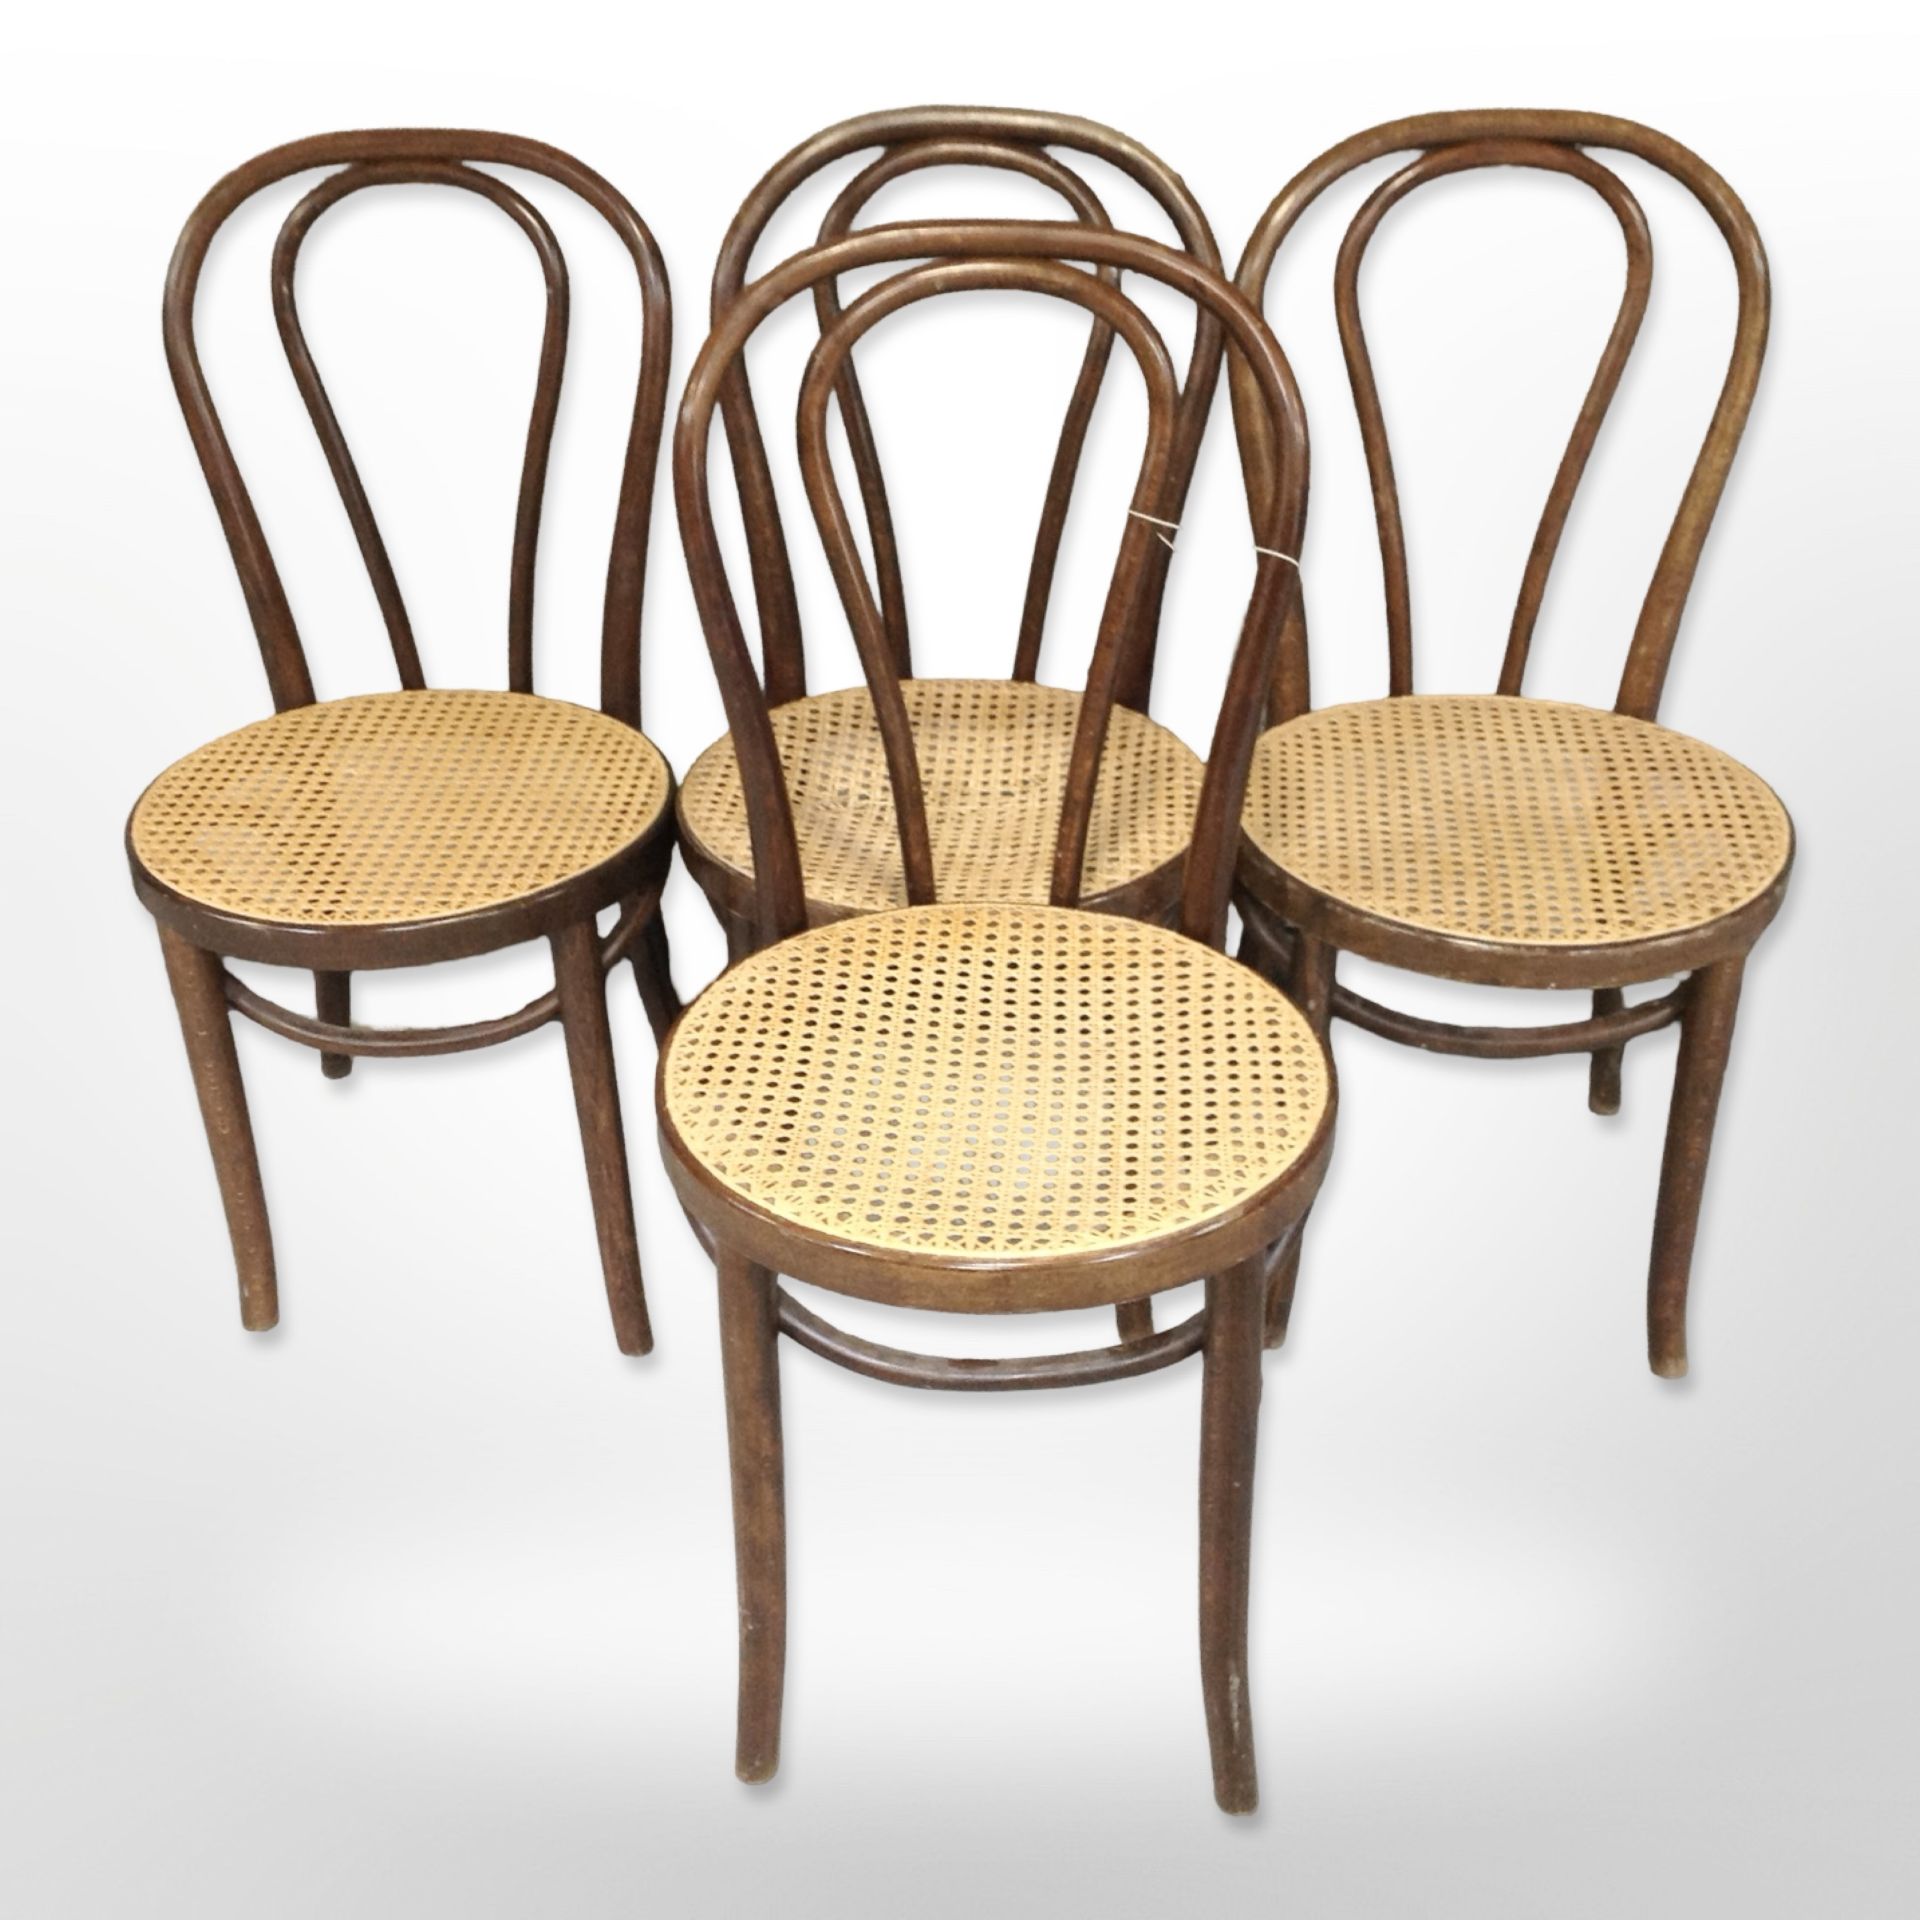 A set of four beech bentwood cafe chairs